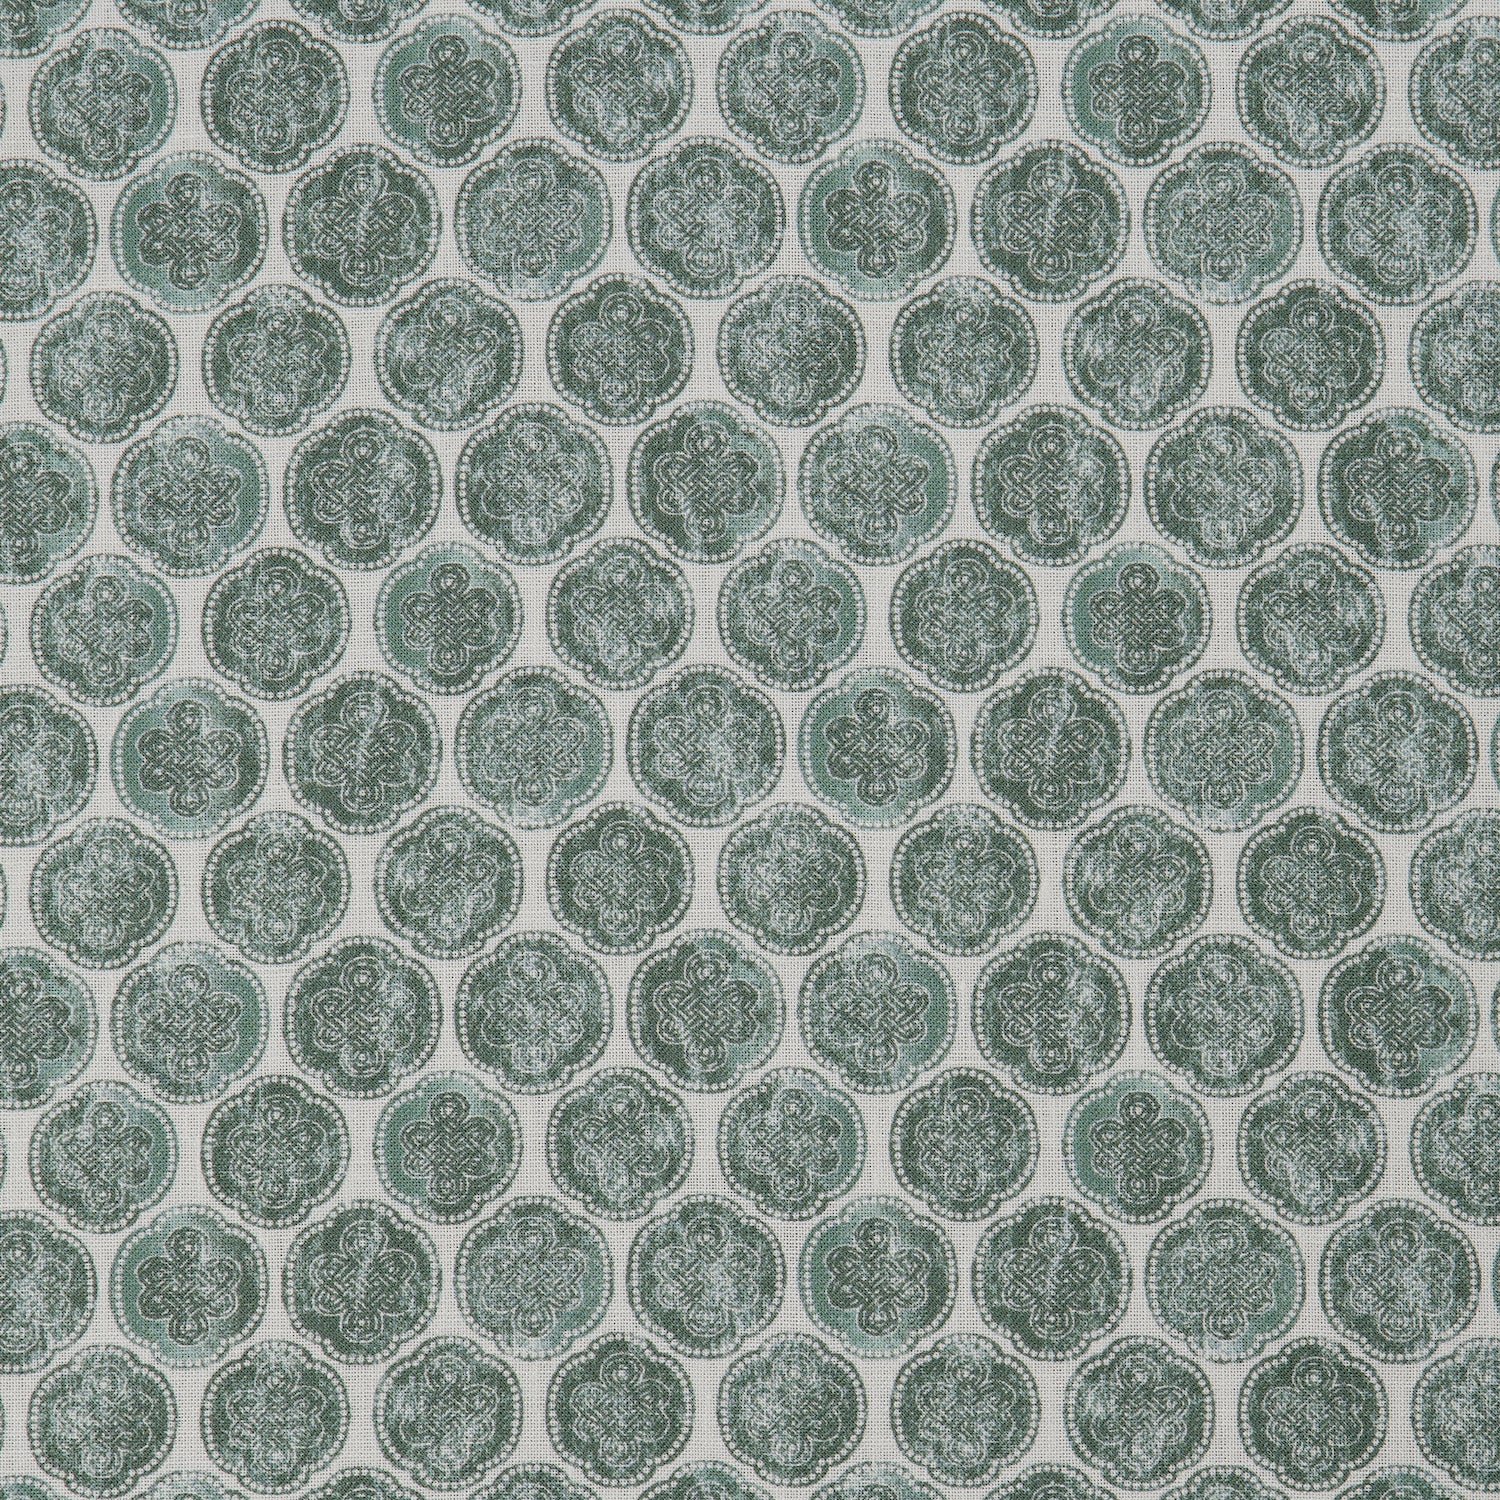 Detail of a printed linen fabric in a repeating knotted pattern in jade on a white field.